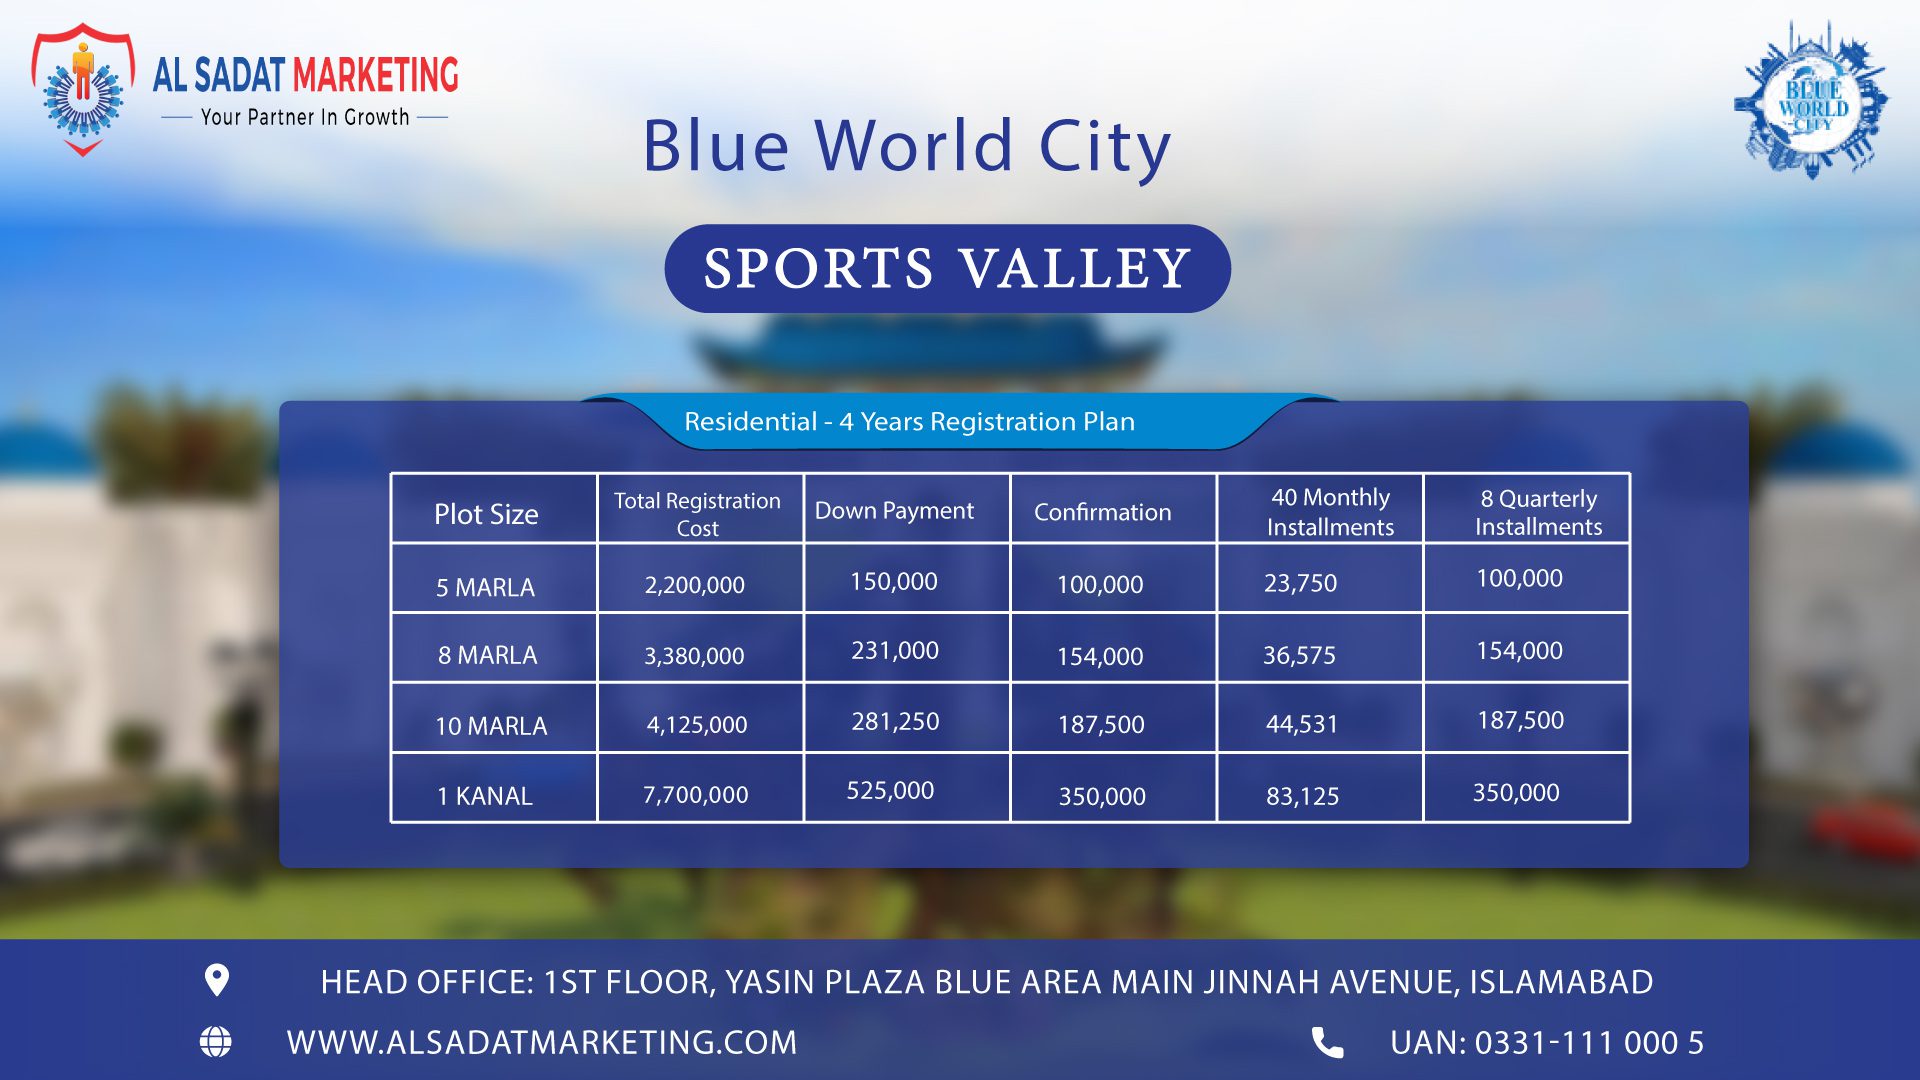 blue world city residential plots updated payment plan – blue world city islamabad residential plots updated payment plan – blue world city rawalpindi residential plots updated payment plan – blue world city sports valley updated payment plan – blue world city islamabad sports valley updated payment plan – blue world city rawalpindi sports valley updated payment plan – blue world city payment plan – blue world city islamabad payment plan - blue world city rawalpindi payment plan – blue world city– blue world city islamabad – blue world city rawalpindi– blue world city housing society – blue world city islamabad housing society – blue world city real estate project – blue world city islamabad real estate project - al sadat marketing - alsadat marketing - al-sadat marketing